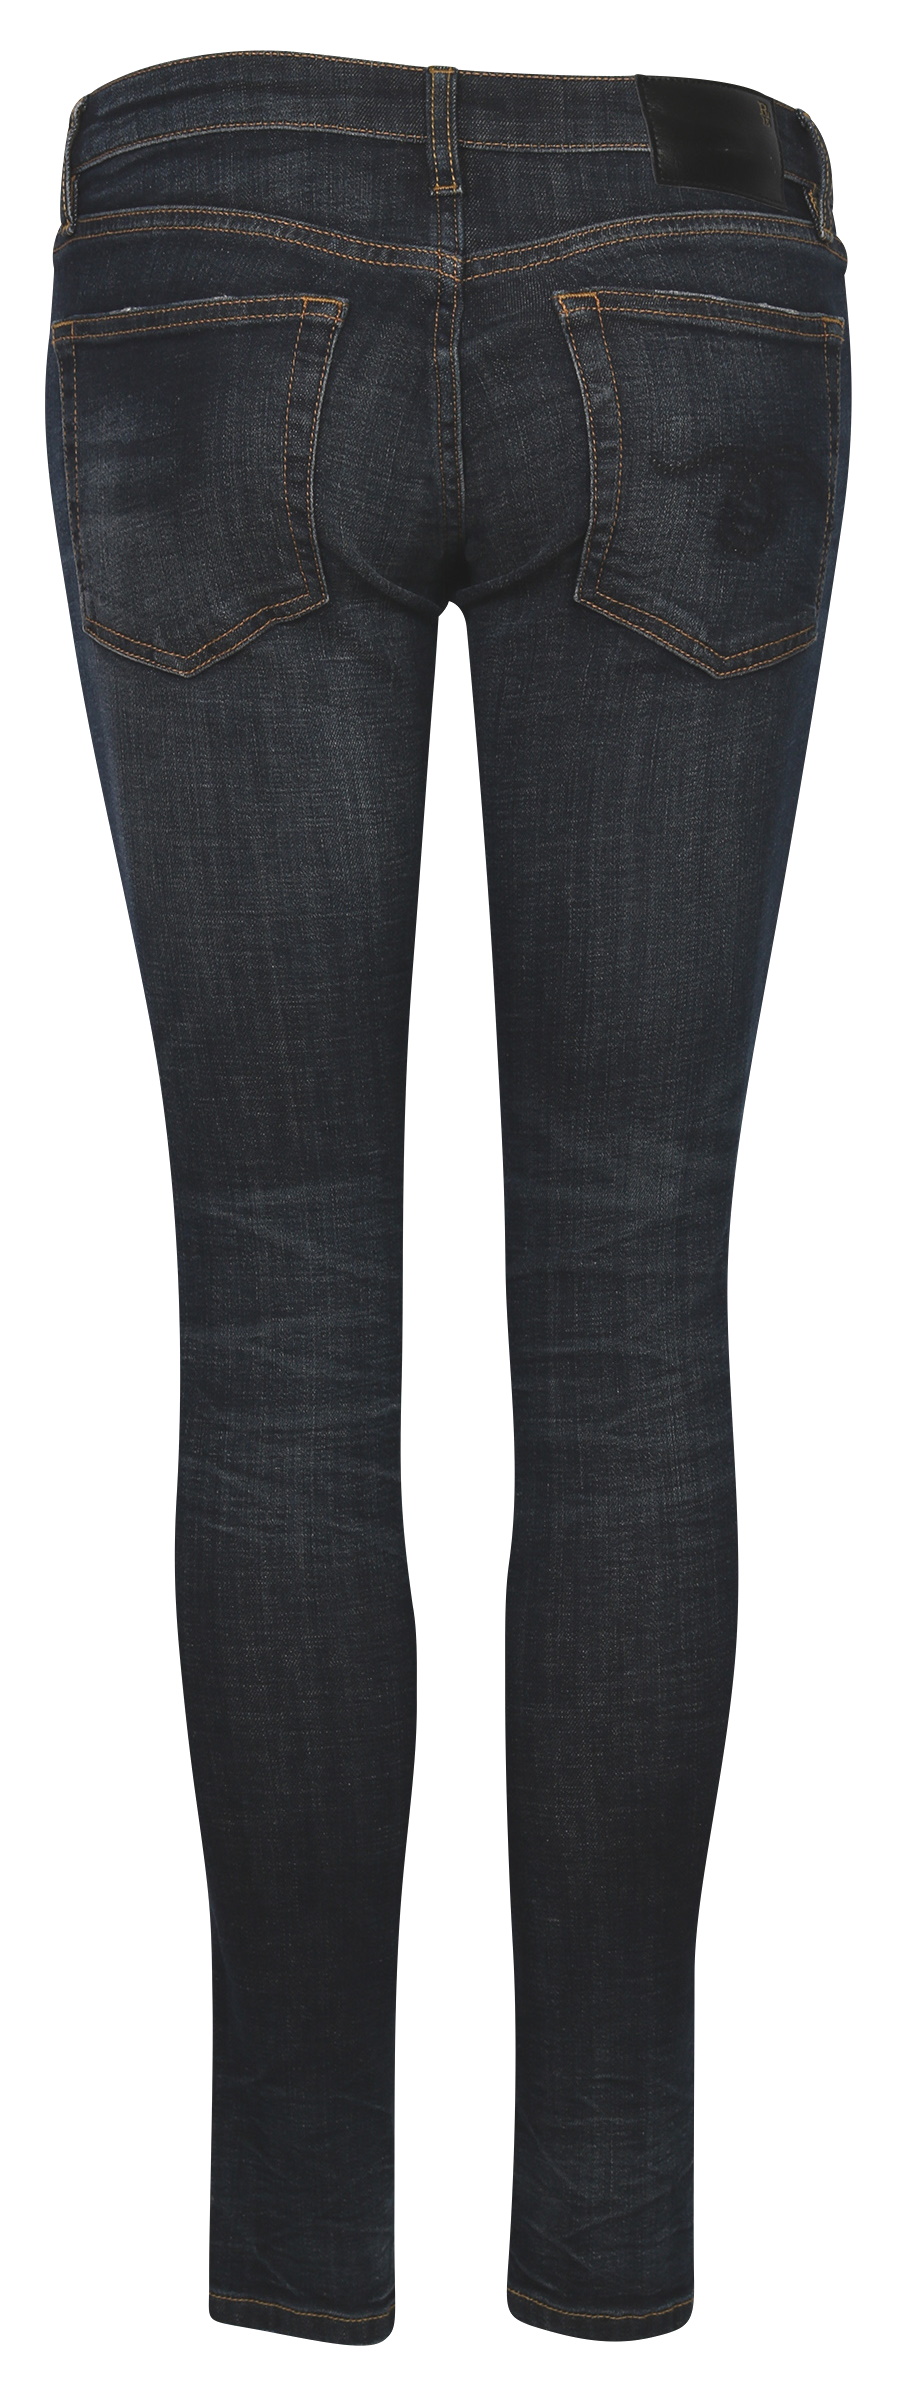 R13 Jeans Kate Howell Blue Washed 26